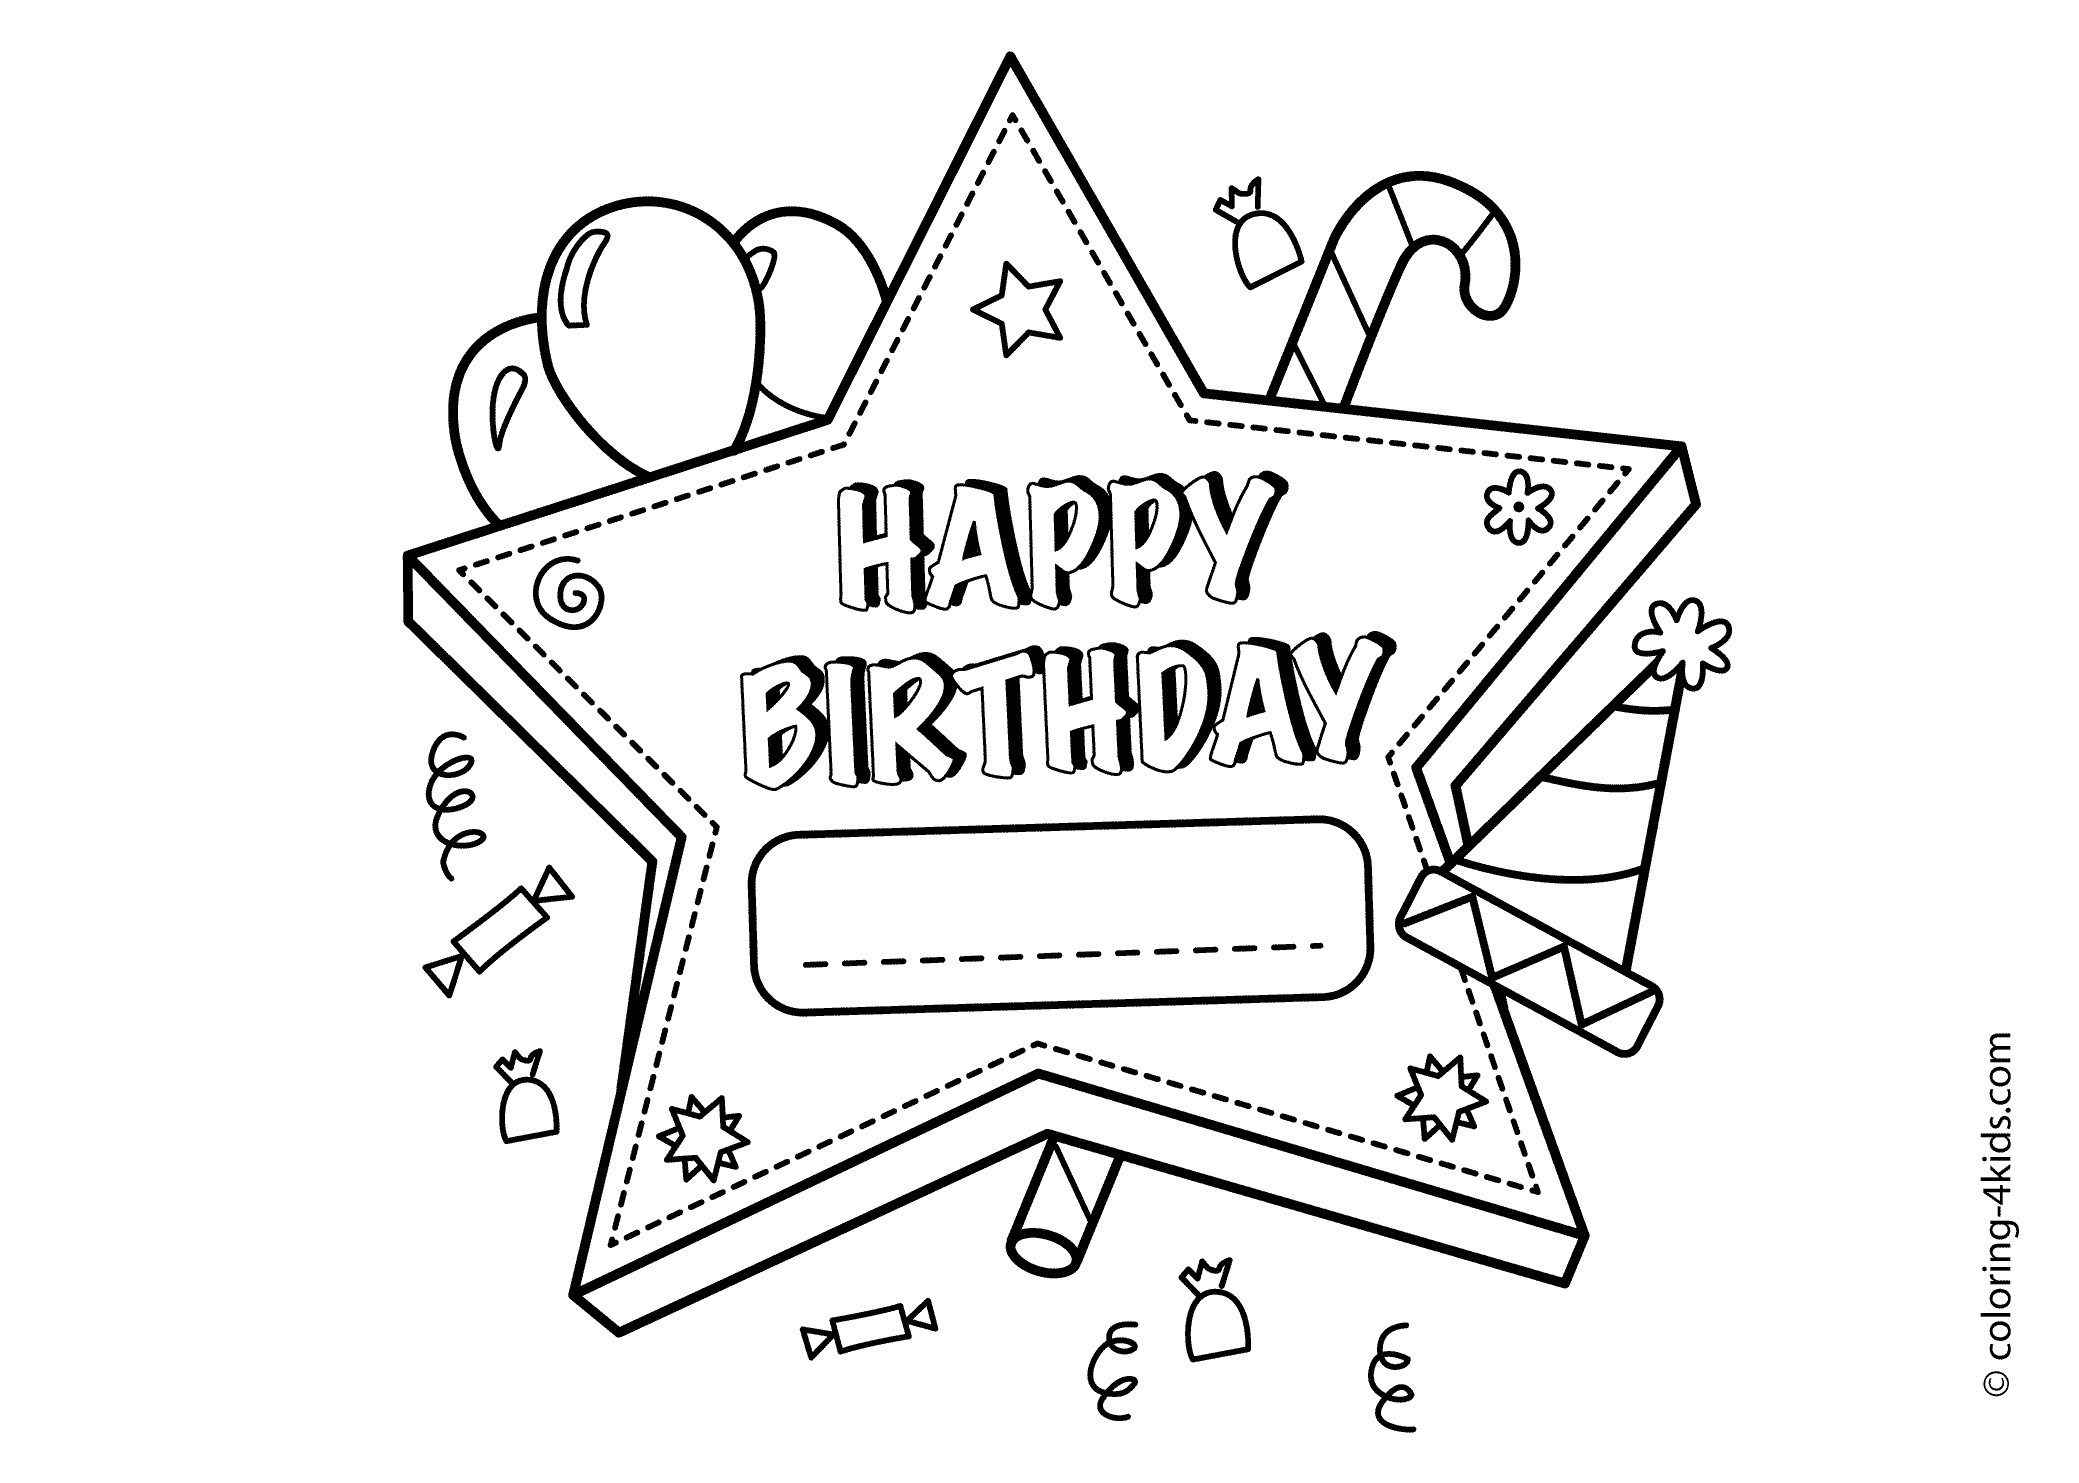 Birthday Coloring Pages For Boys
 Happy birthday printable star – coloring pages for kids